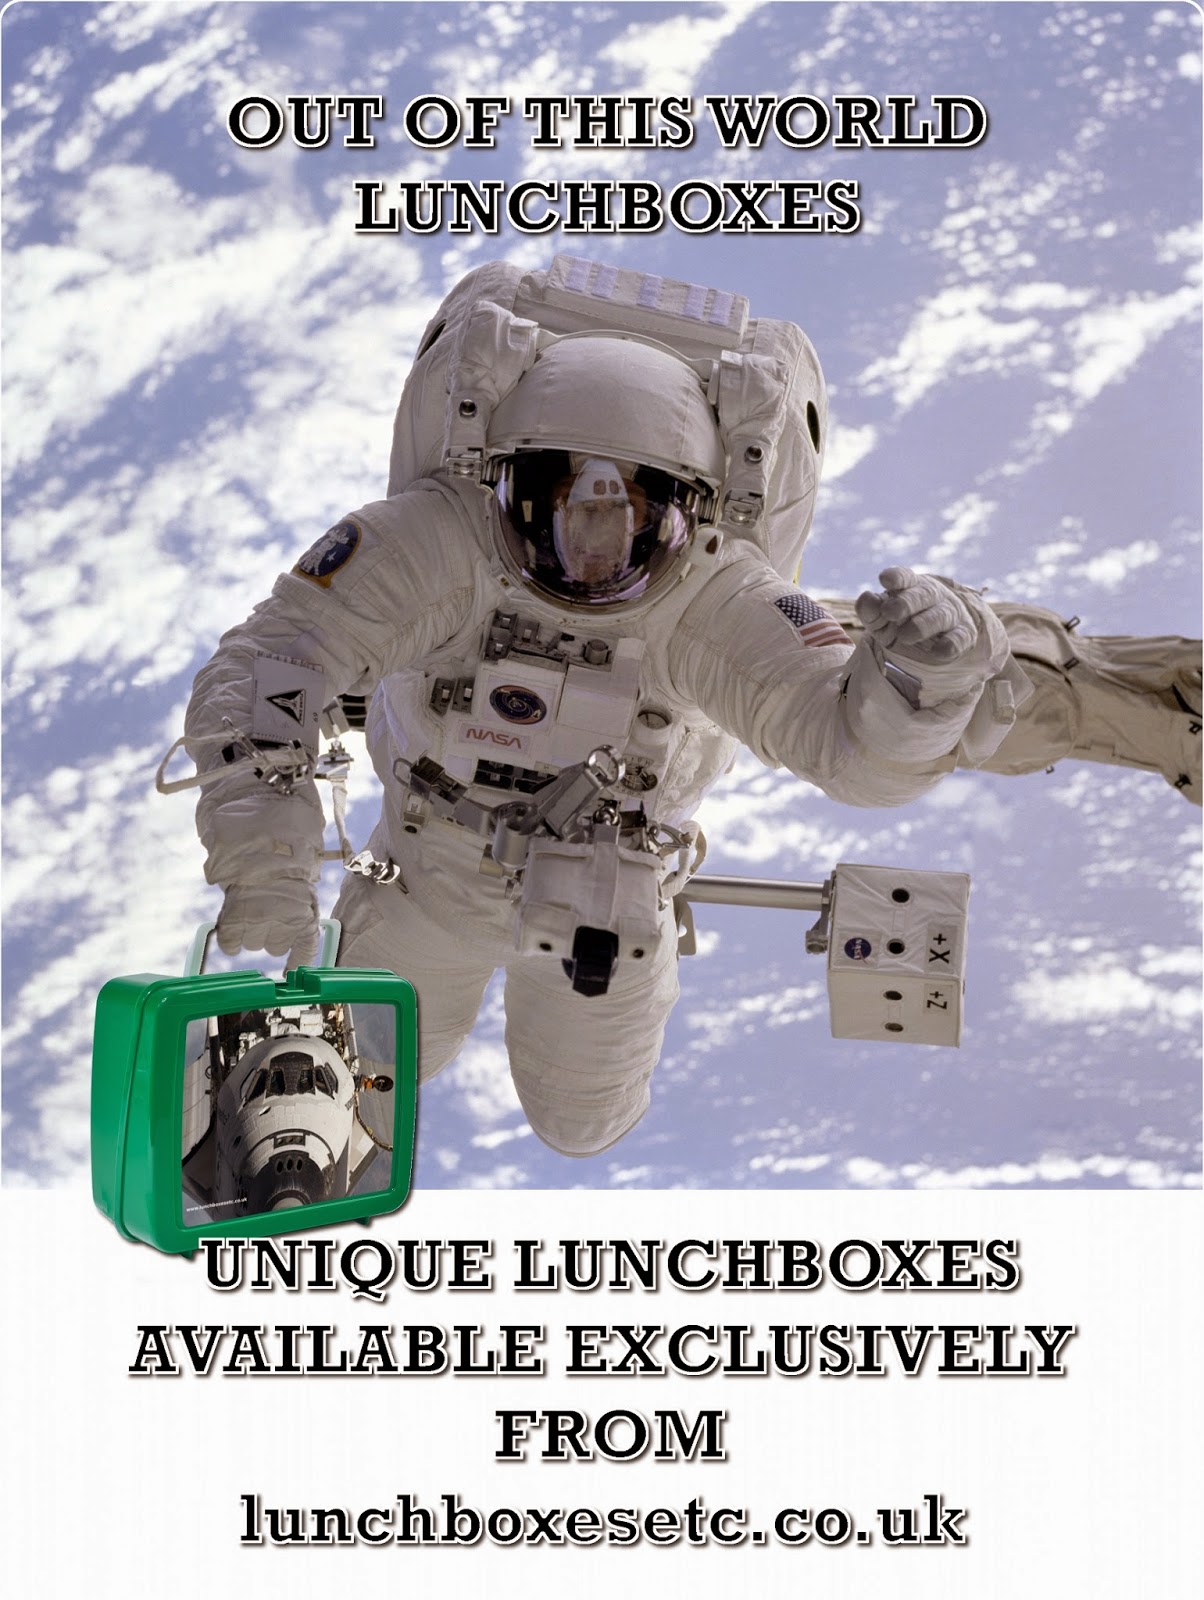 http://www.lunchboxesetc.co.uk/space-lunch-boxes/